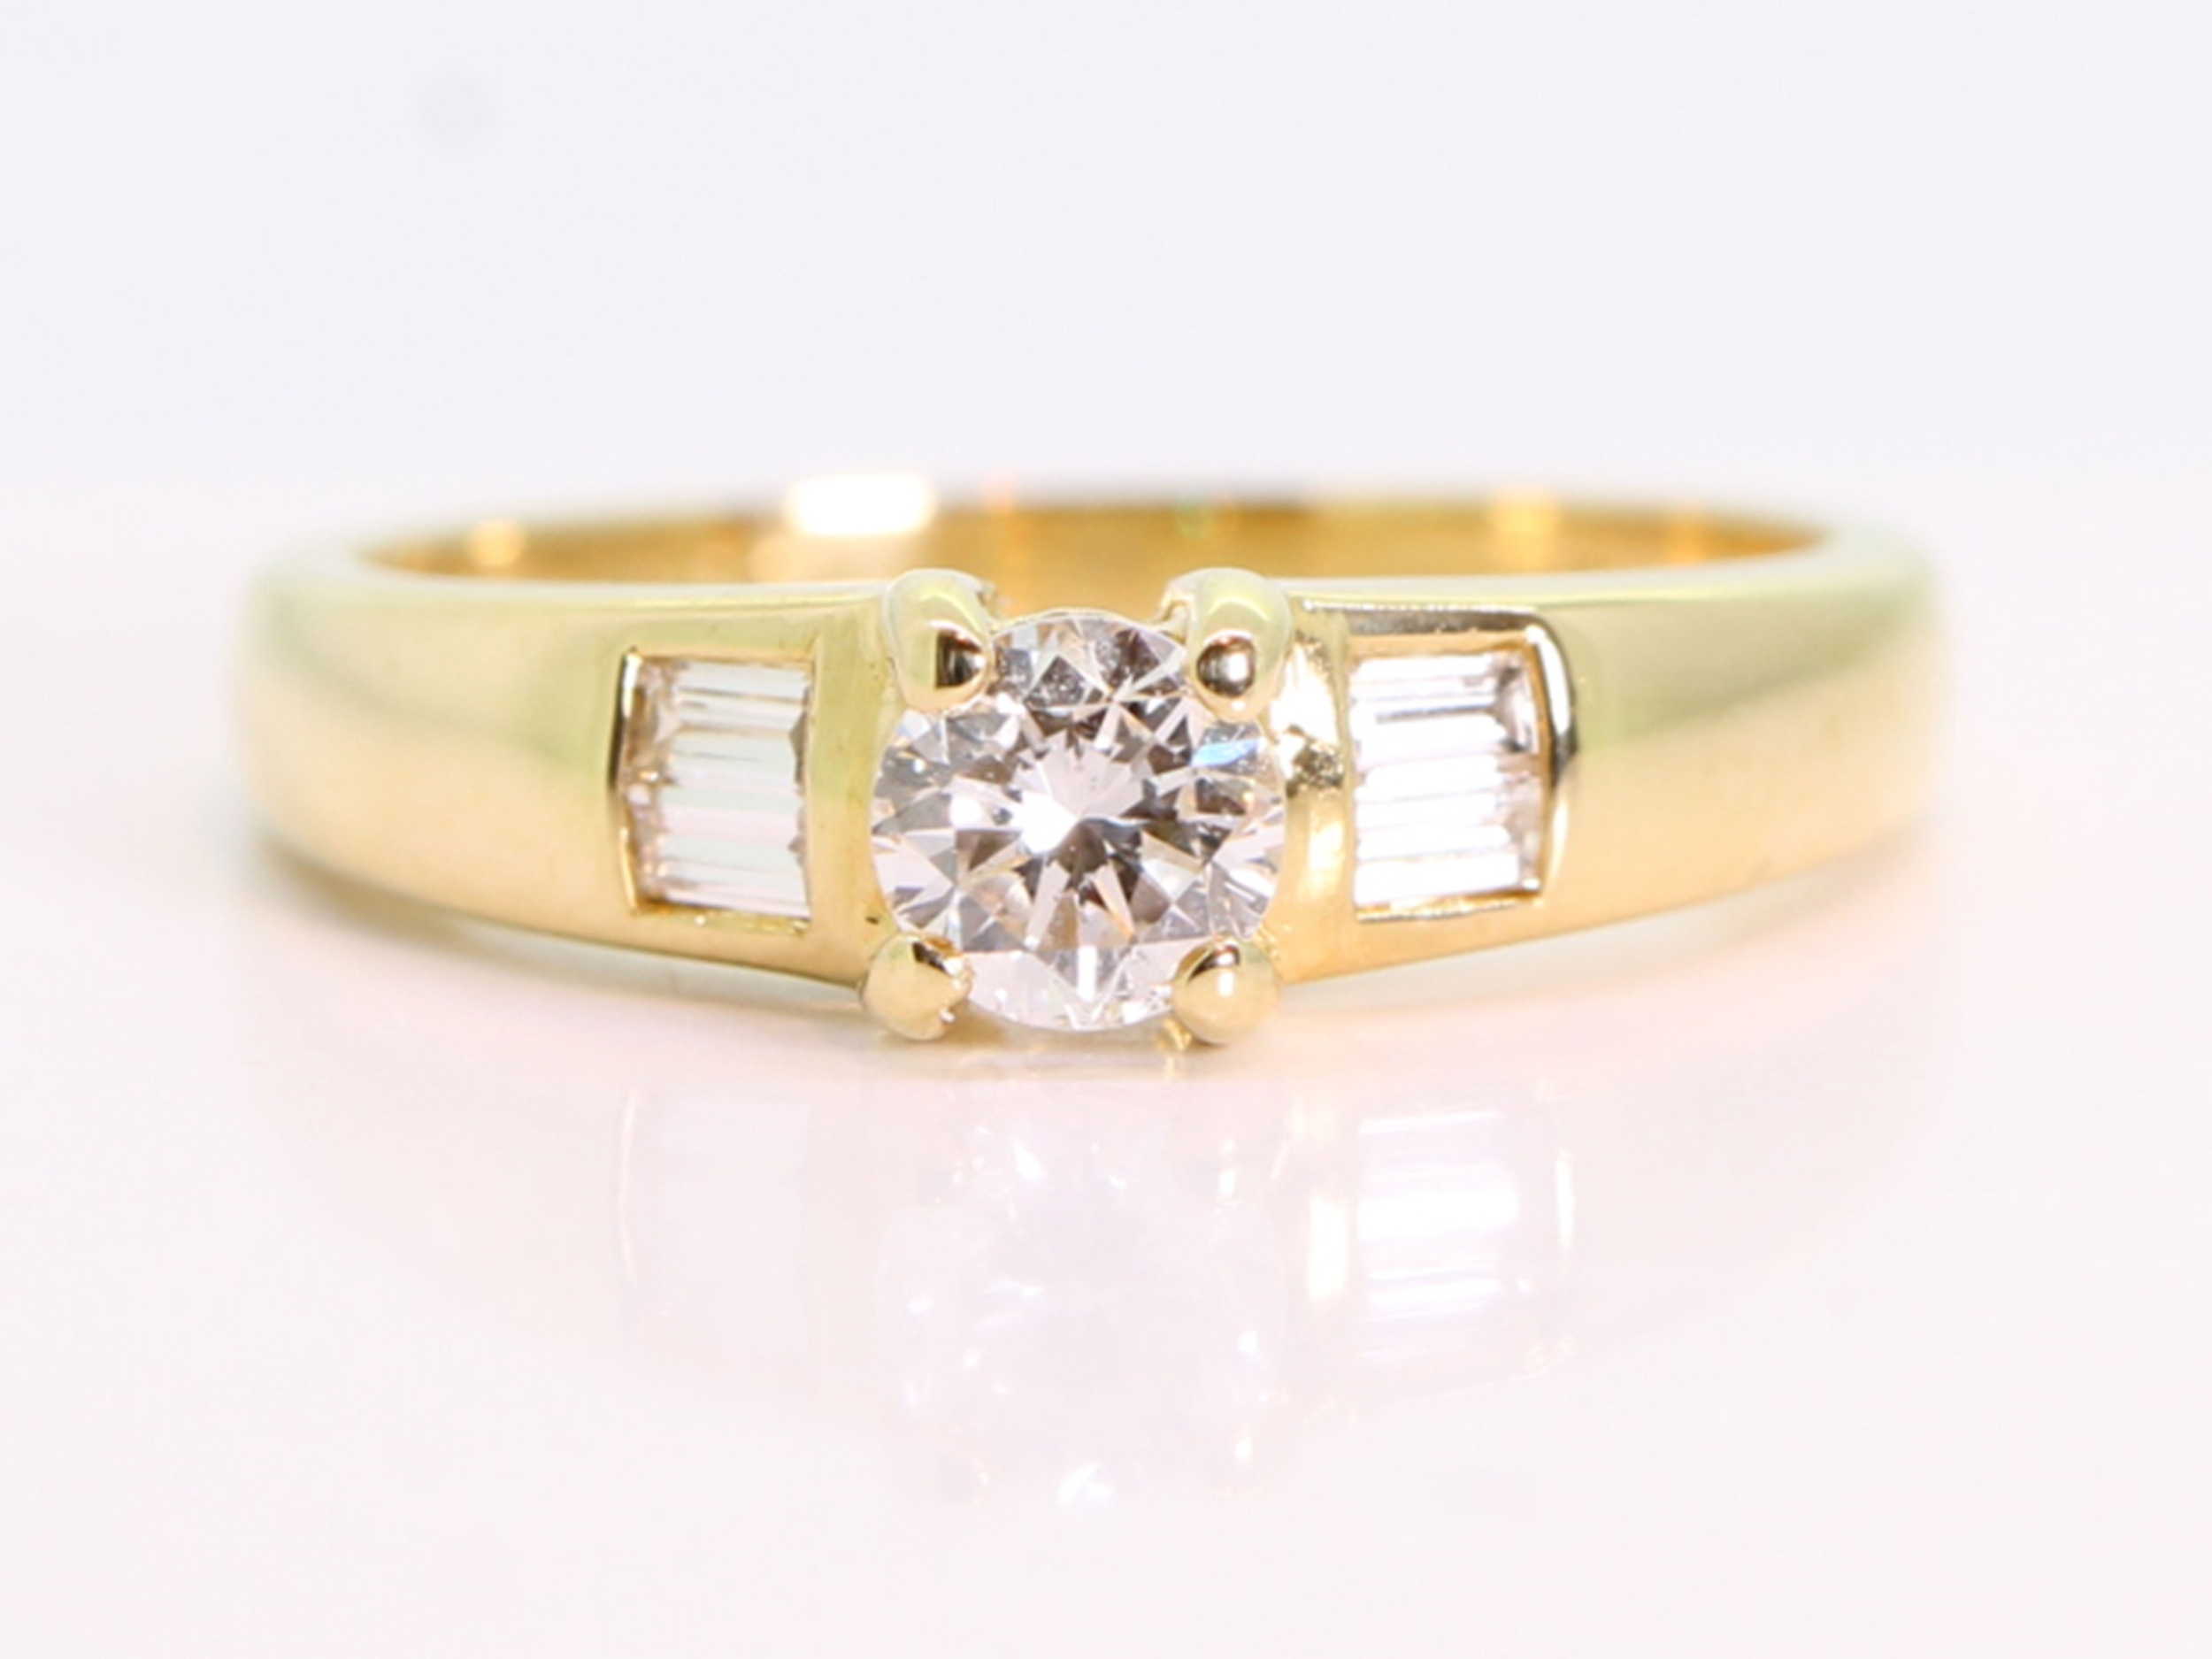 Diamond solitaire with baguette diamond shoulders 18ct gold ring